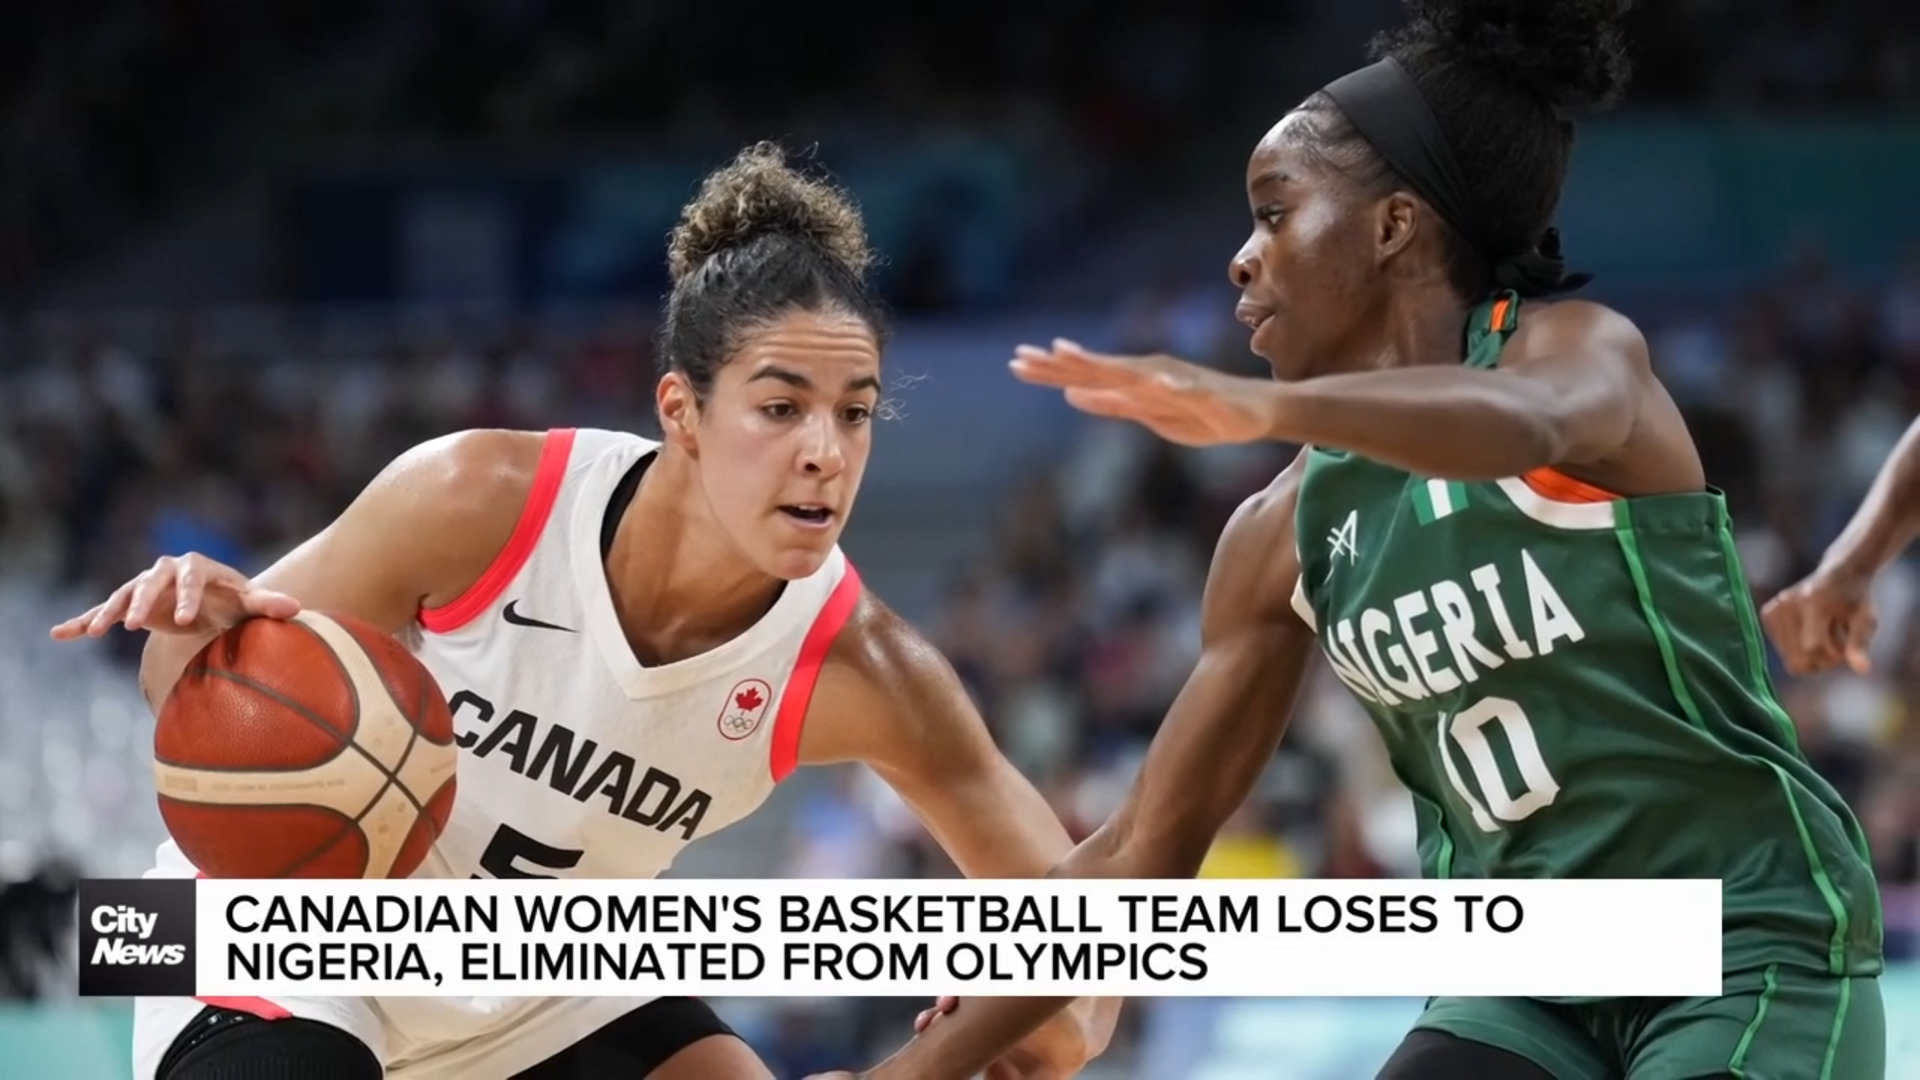 Canadian women’s basketball team eliminated from Olympics